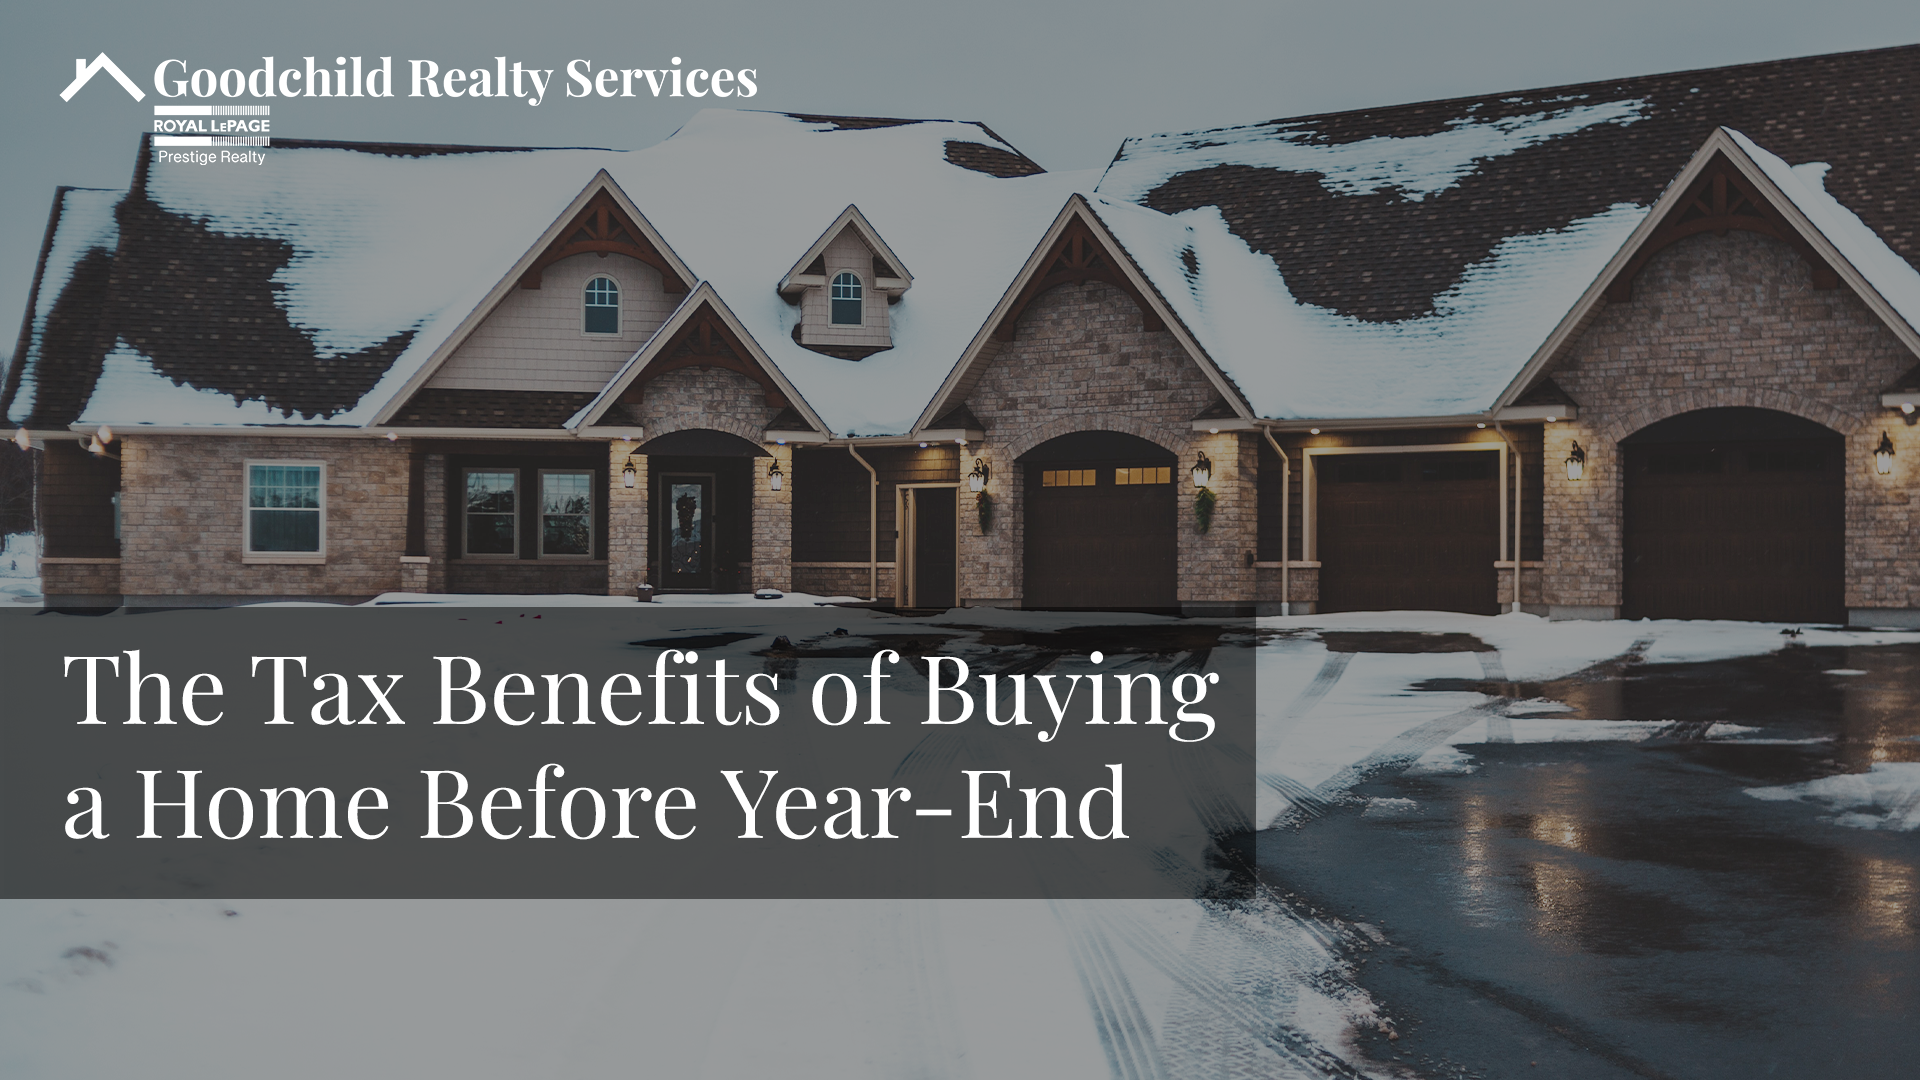 The Tax Benefits of Buying a Home Before Year-End